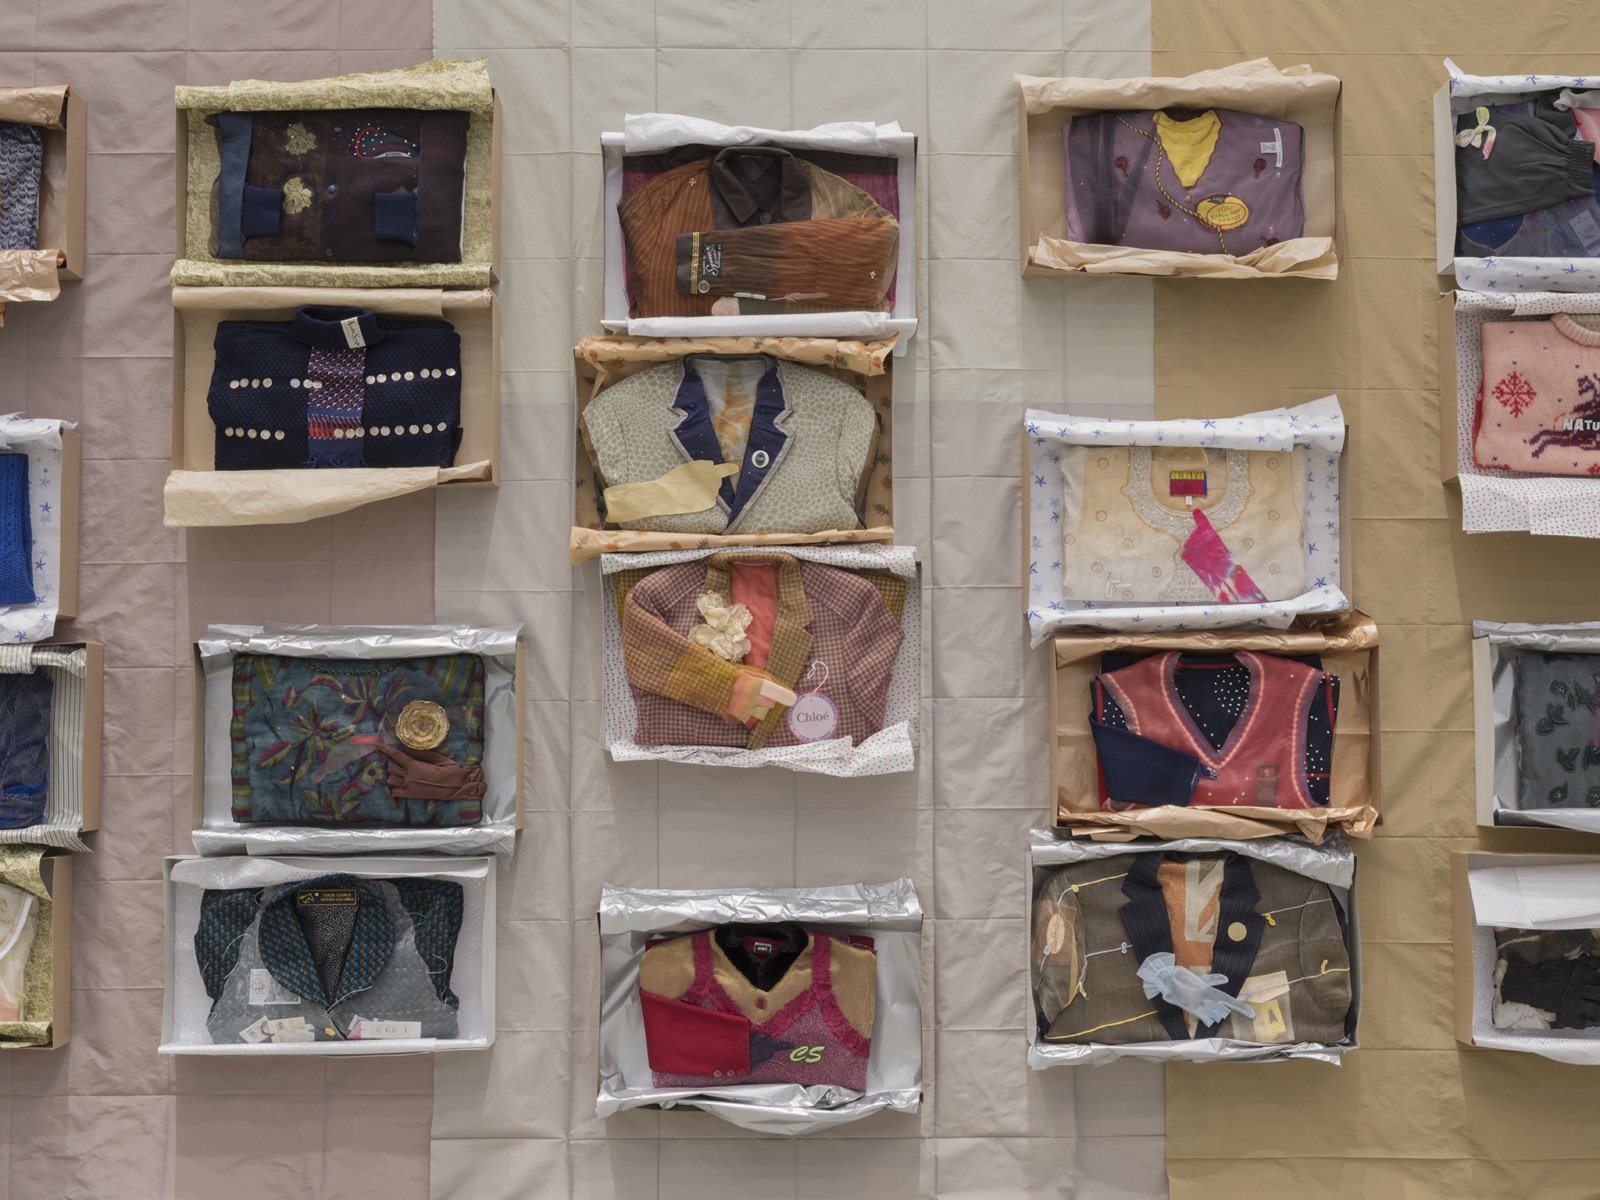 Liz Magor, Being This (detail), 2012–2019, paper, textiles, found materials, 96 x 432 x 22 in. (244 x 1097 x 56 cm)